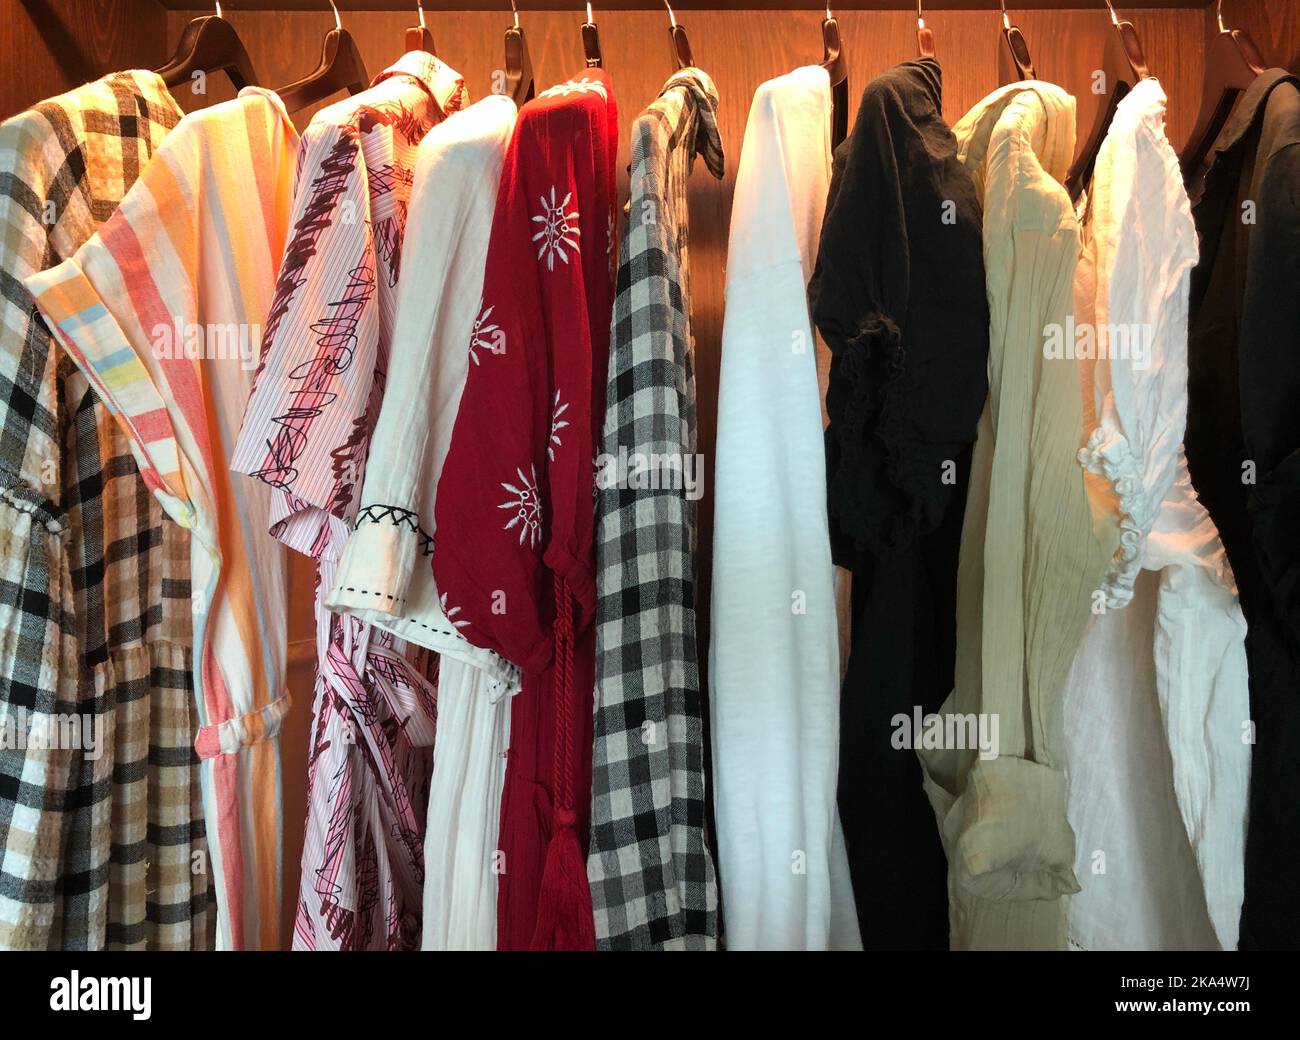 Close-up of women's clothes hanging in an illuminated wardrobe Stock Photo